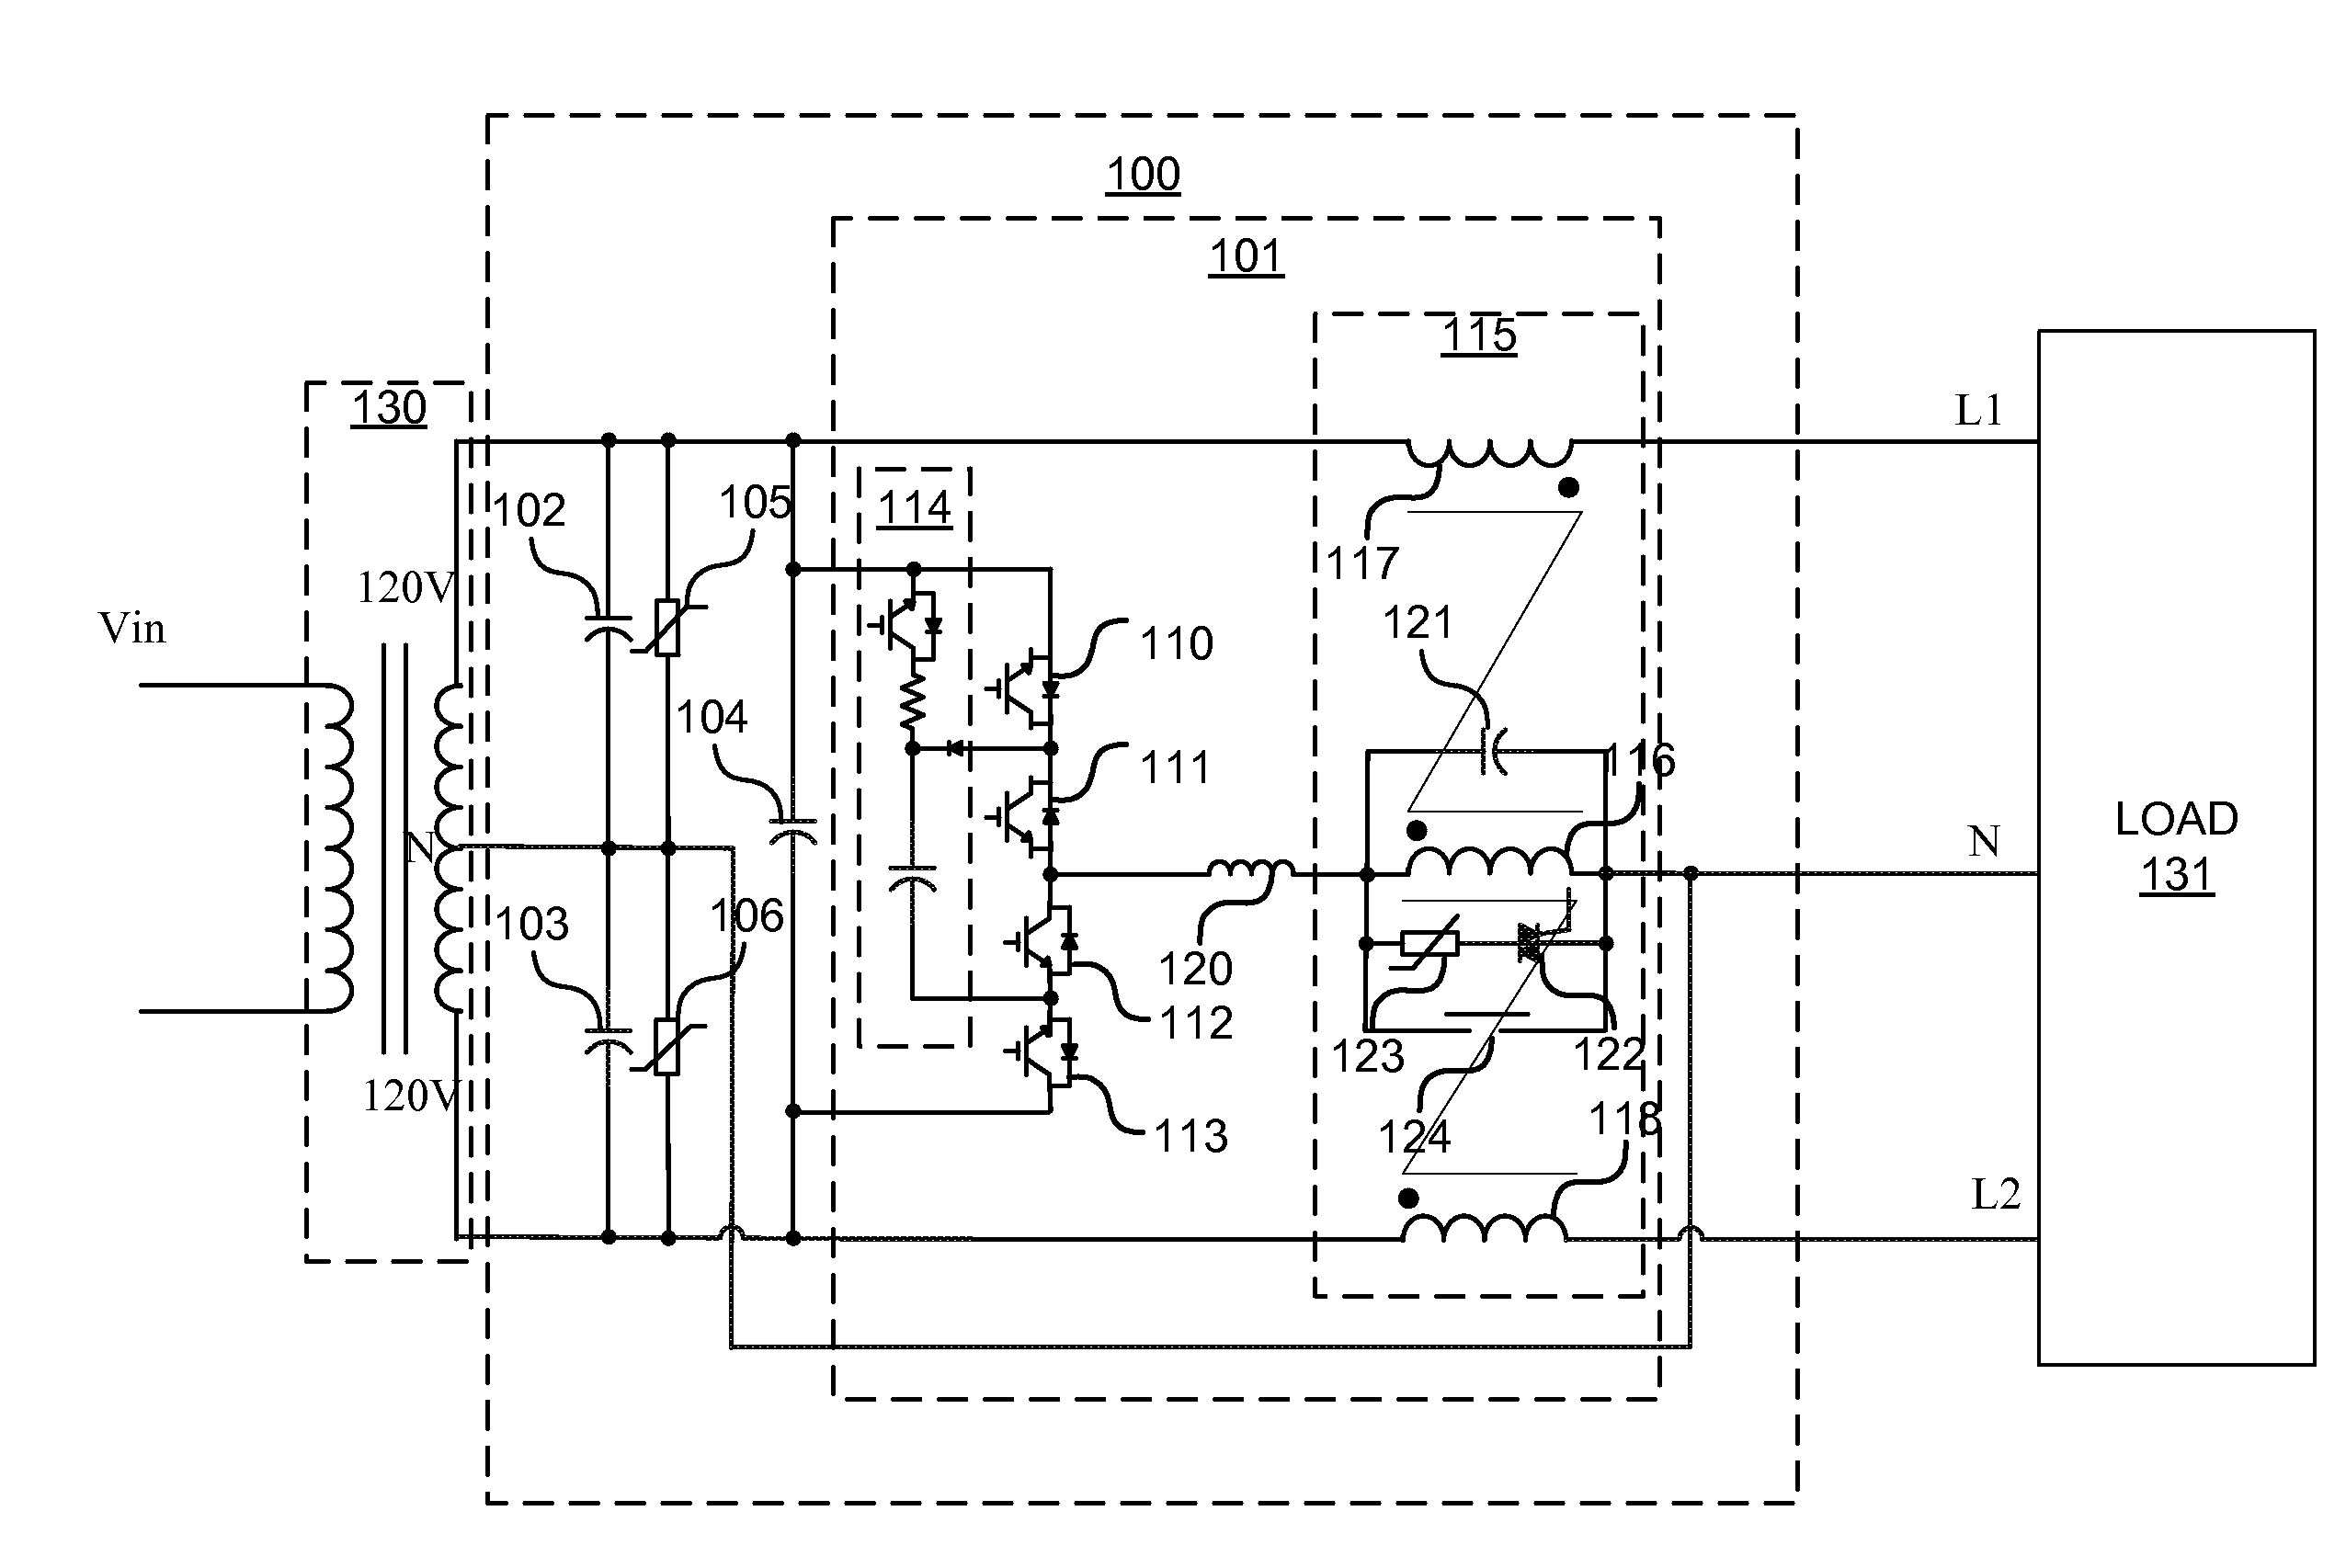 Systems and methods for dynamic ac line voltage regulation with energy saving tracking